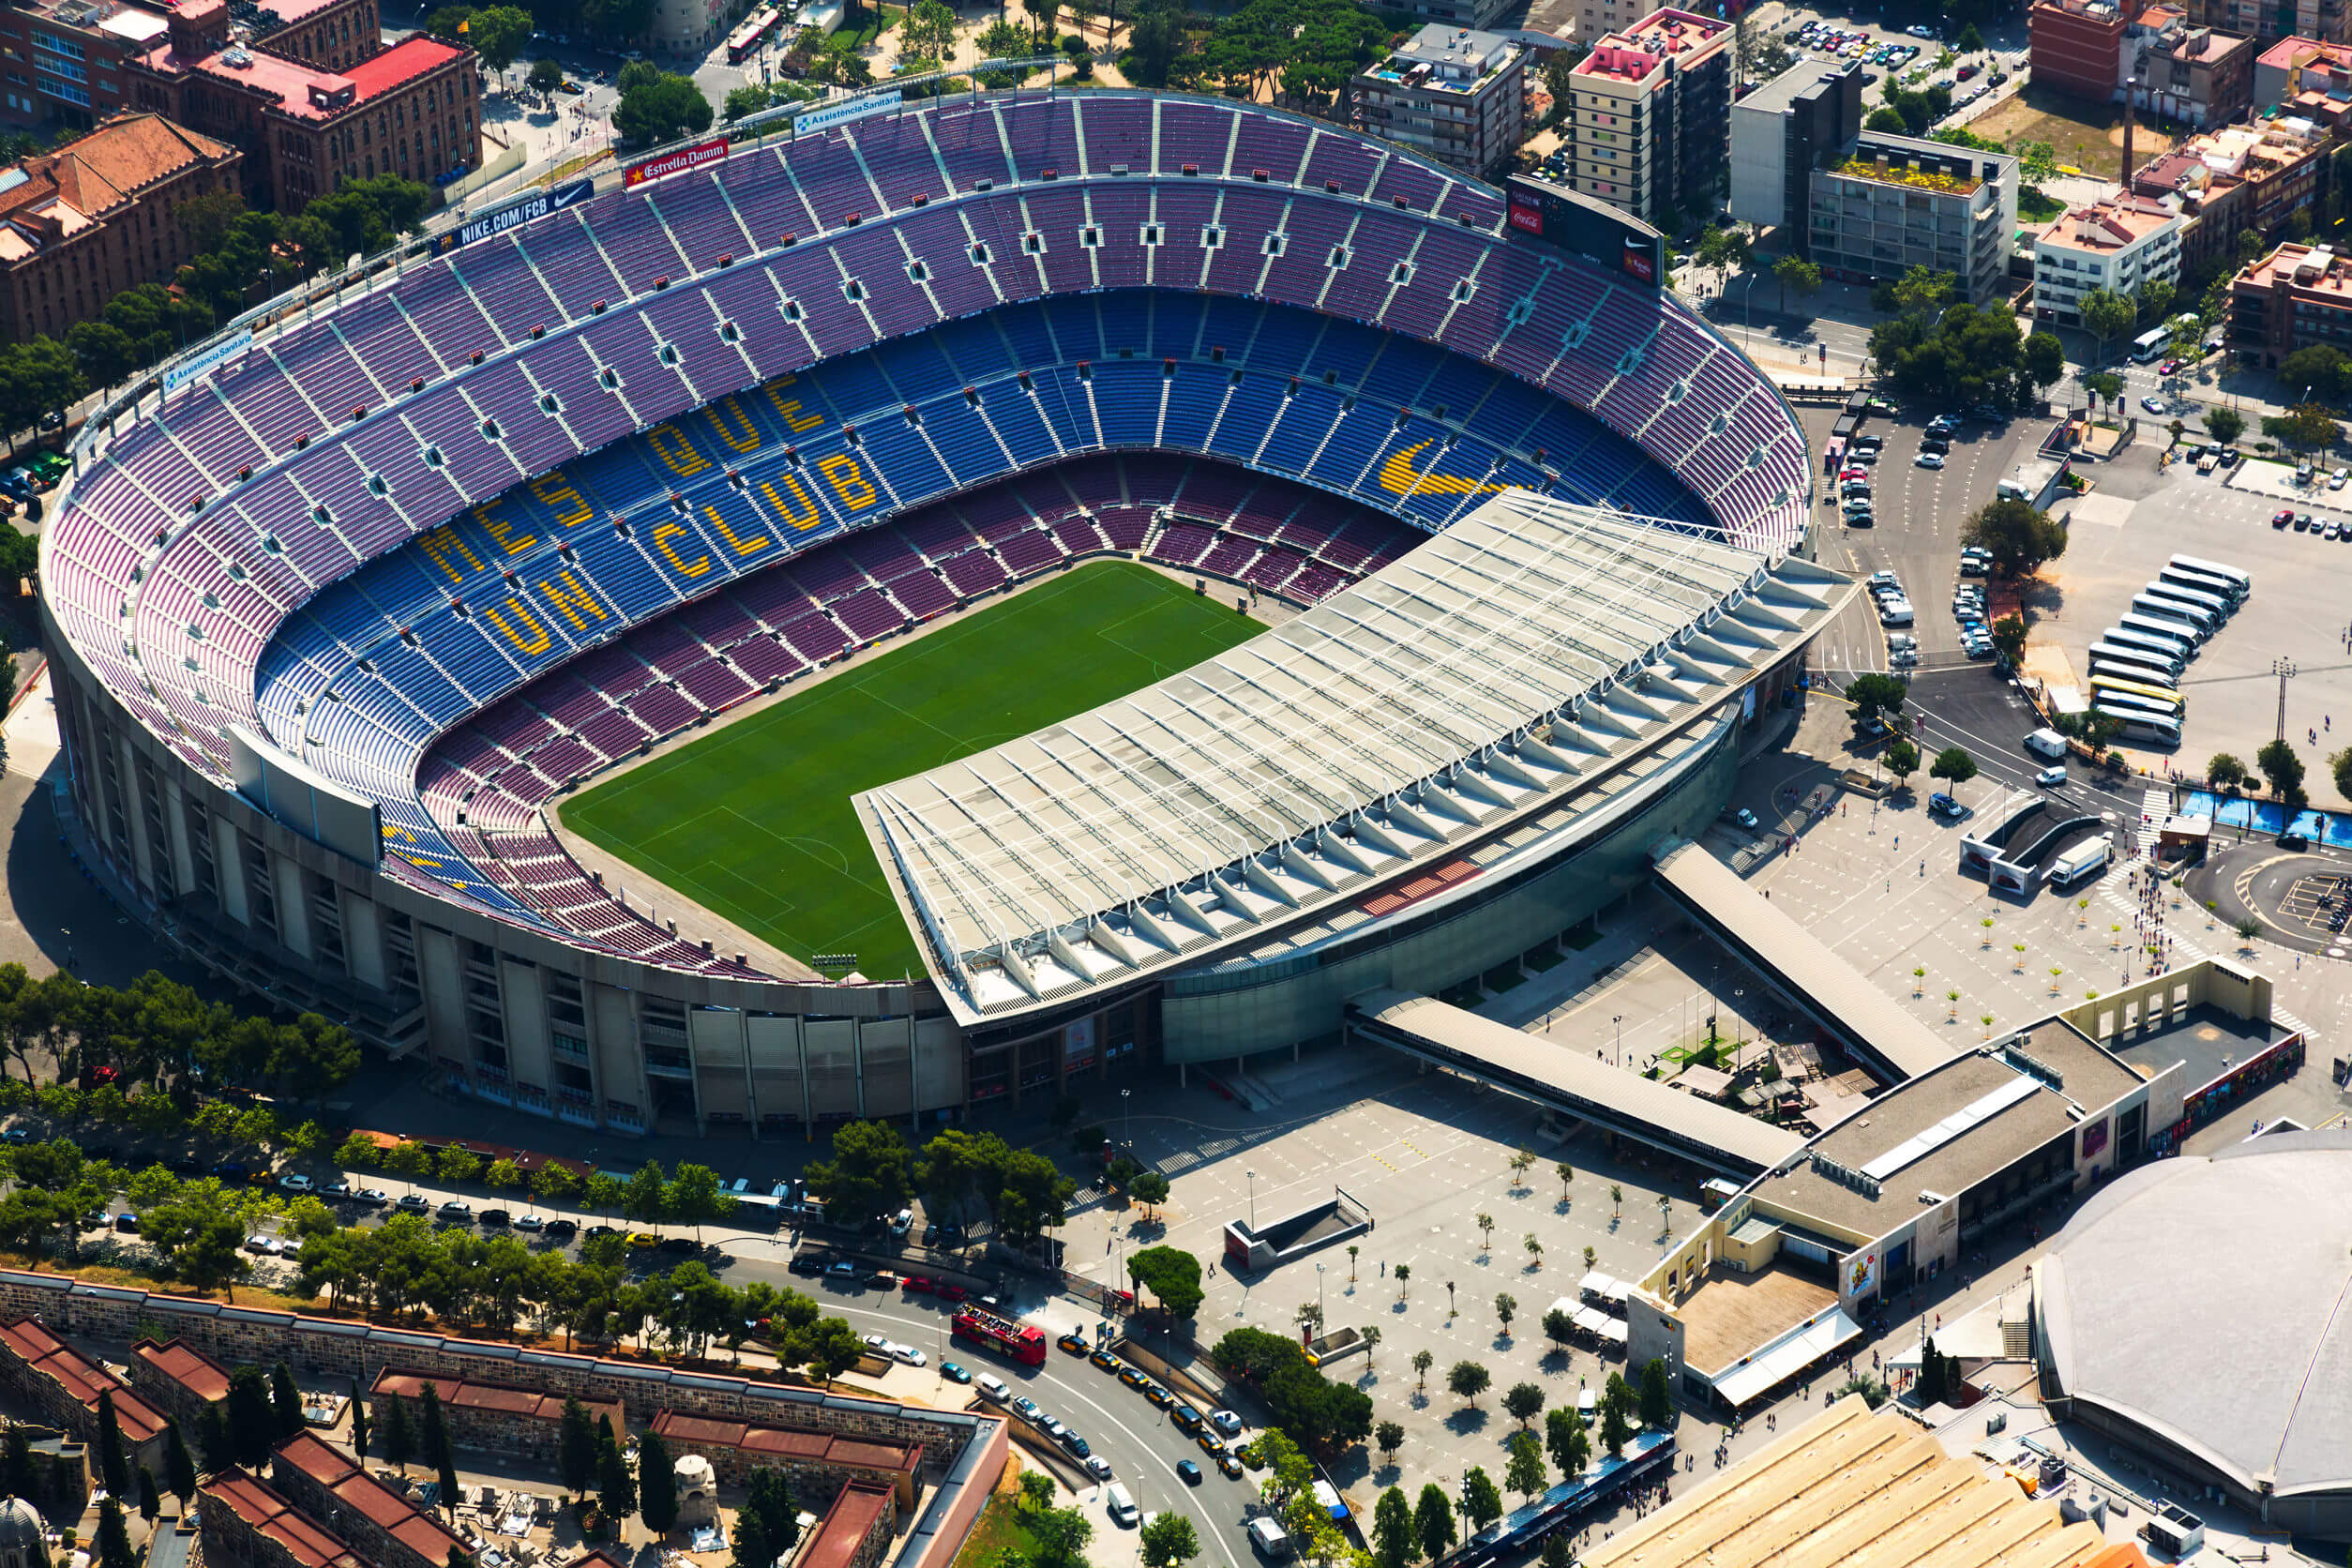 BARCELONA, SPAIN - AUGUST 1, 2014: Aerial view of Camp Nou - largest stadium of Barcelona